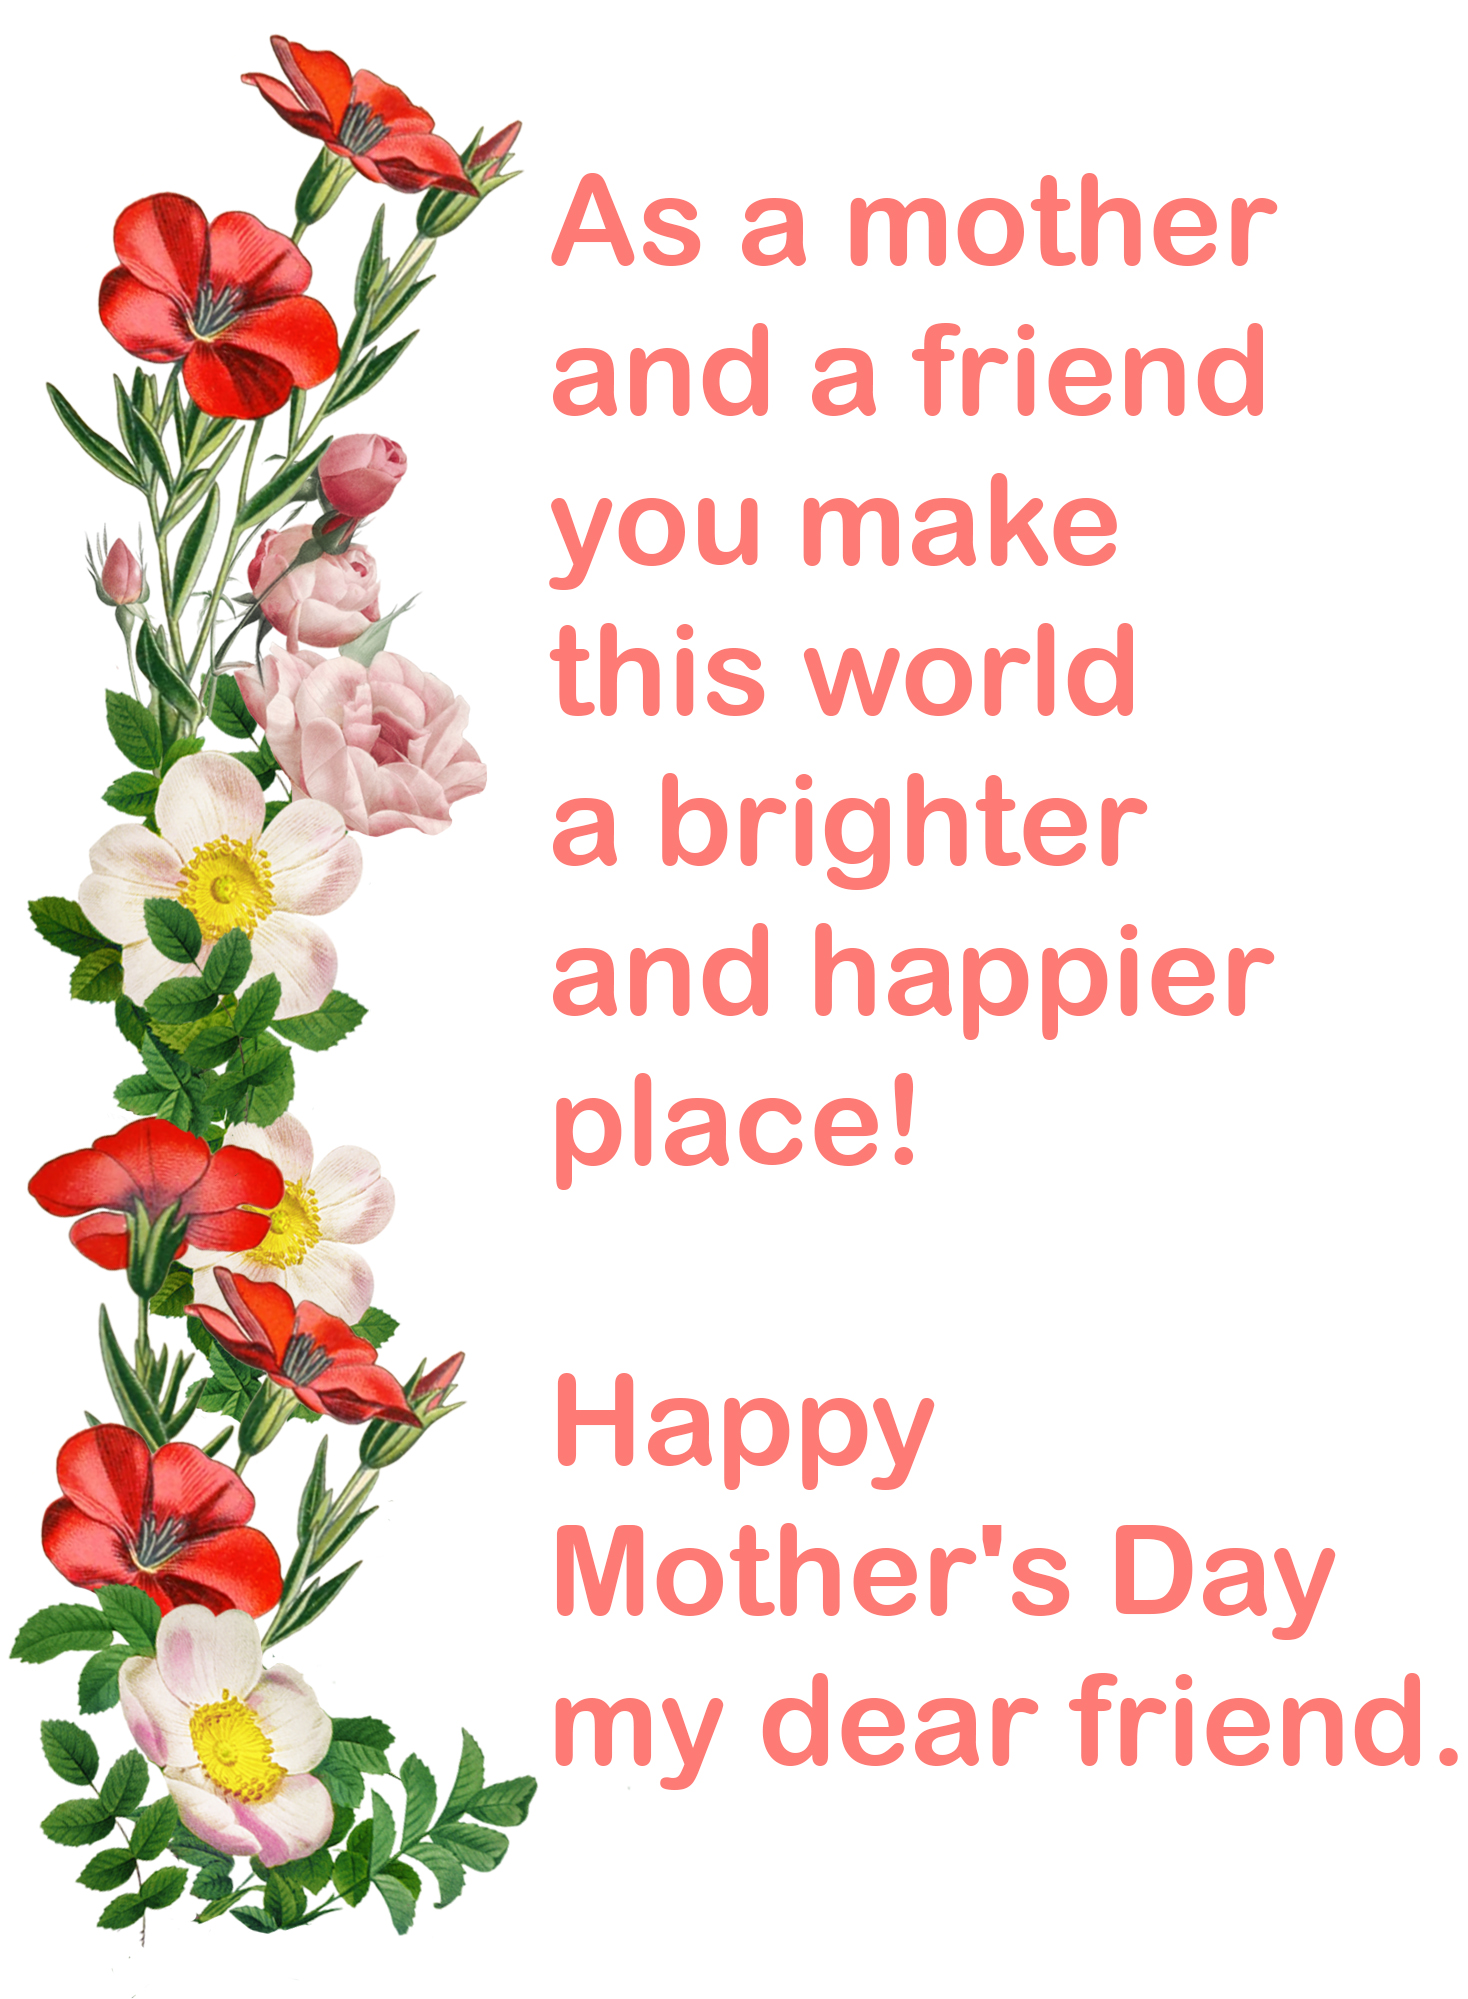 happy Mother's day friend image